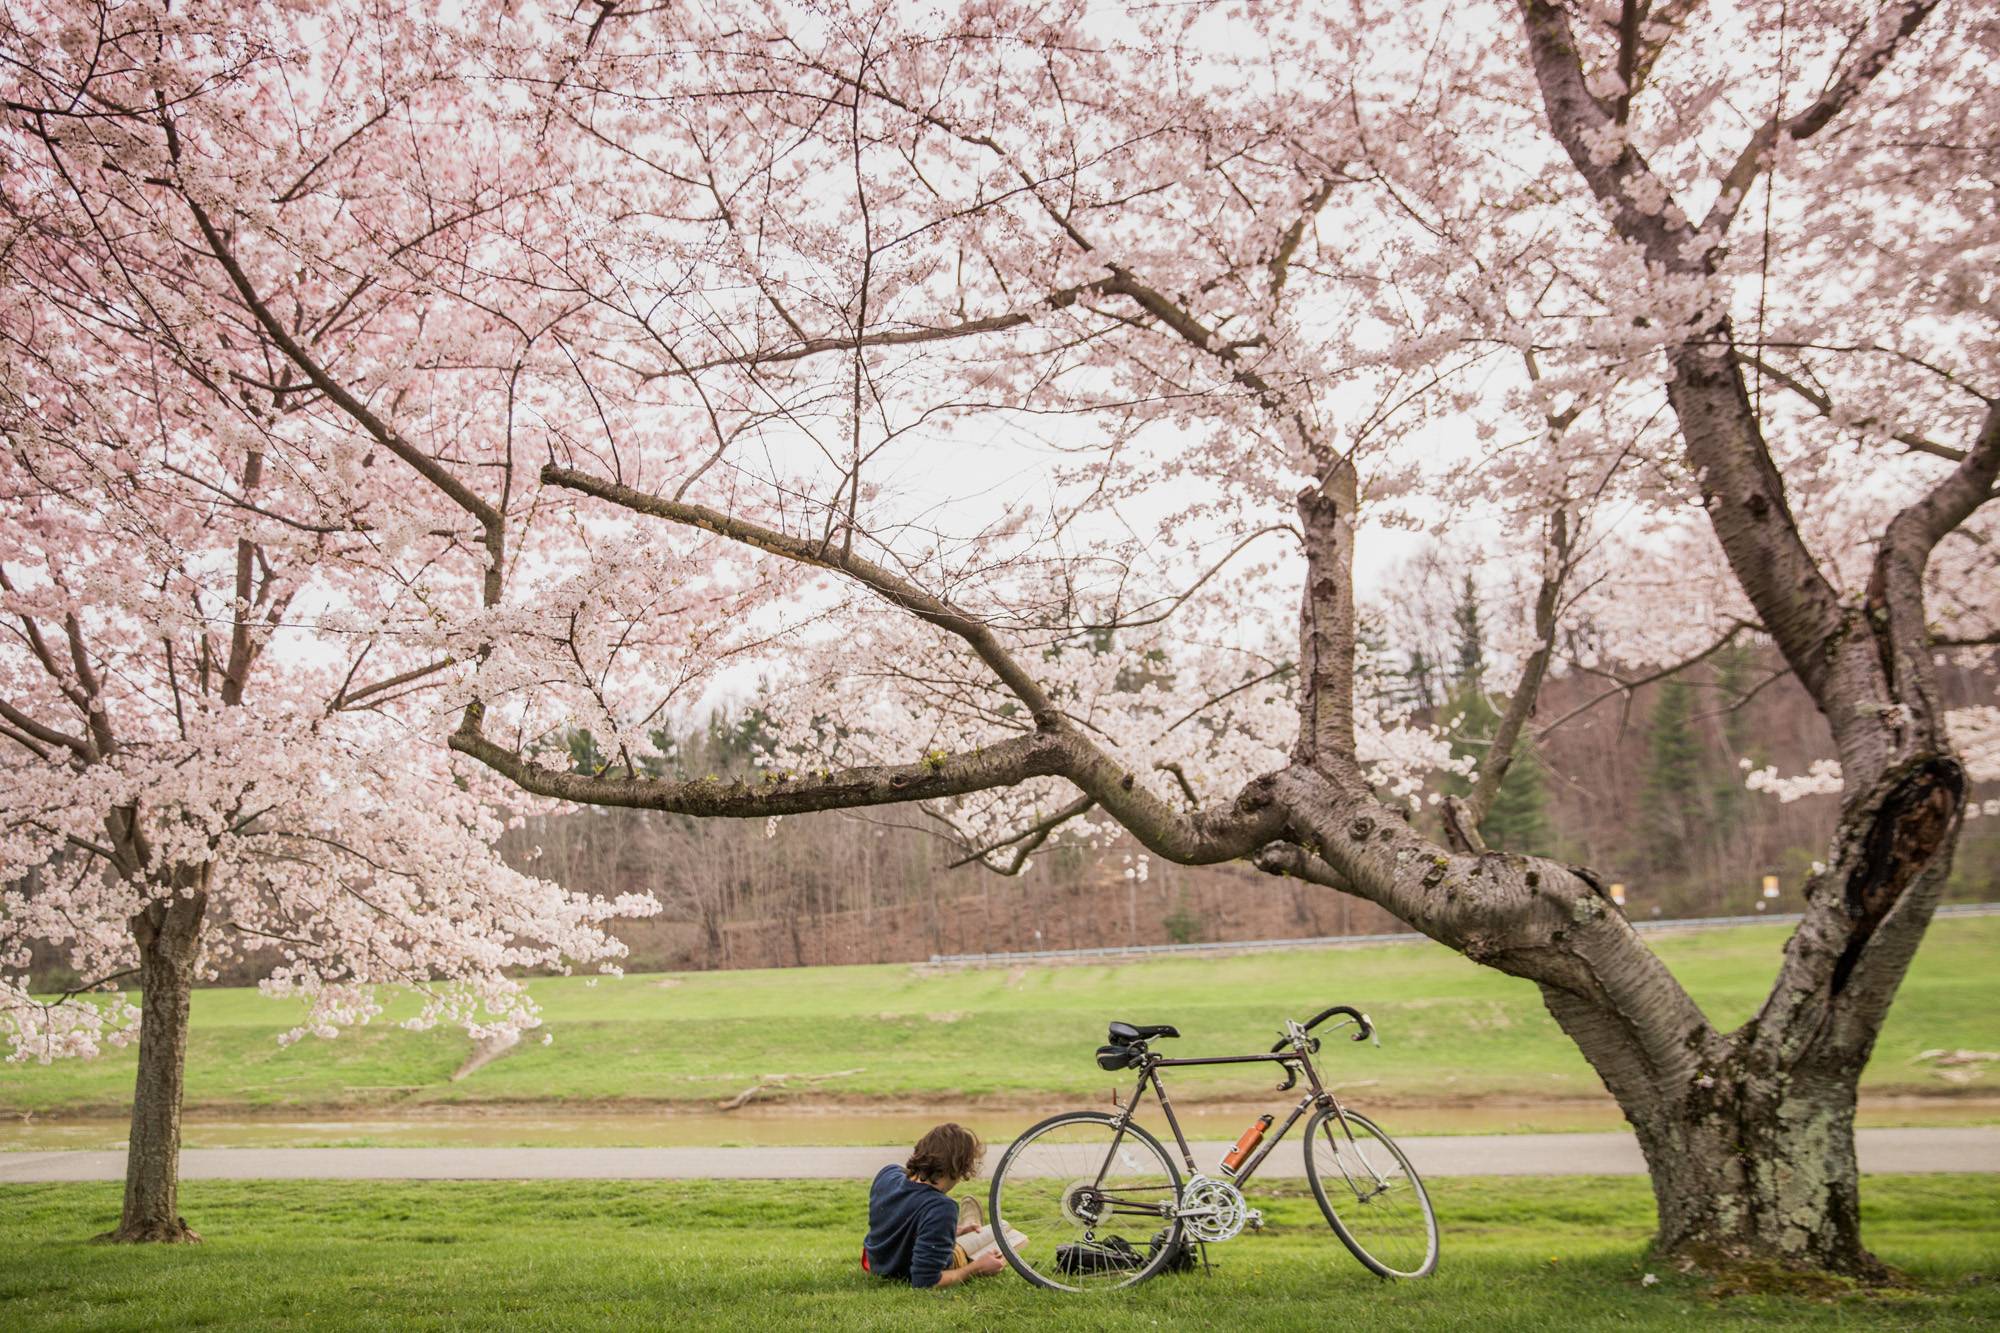 A cyclist stops to enjoy the cherry blossoms in bloom along banks of the Hocking River in Athens. 